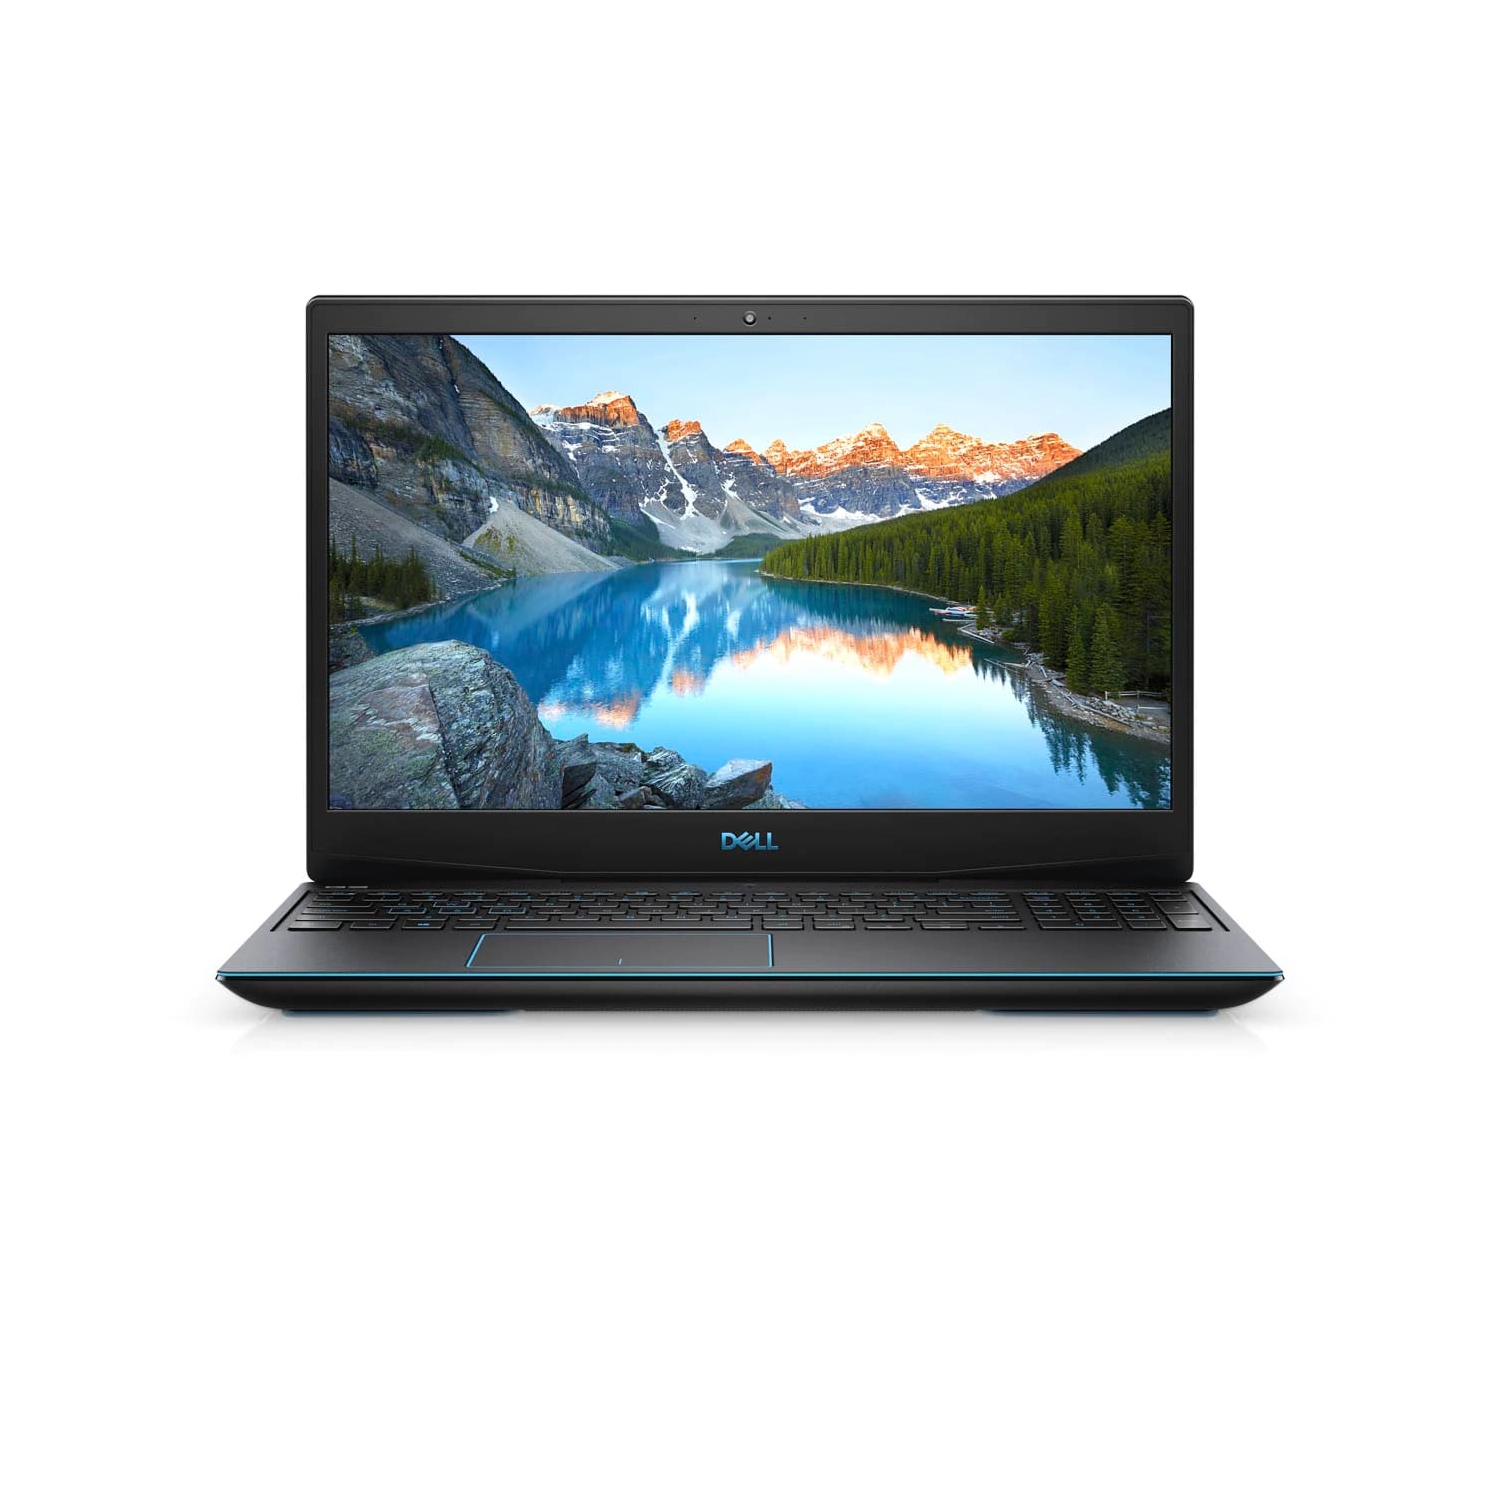 Refurbished (Excellent) - Dell G3 15 3590 Gaming Laptop (2019) | 15.6" FHD | Core i5 - 512GB SSD - 8GB RAM - 1660 Ti | 4 Cores @ 4.1 GHz Certified Refurbished